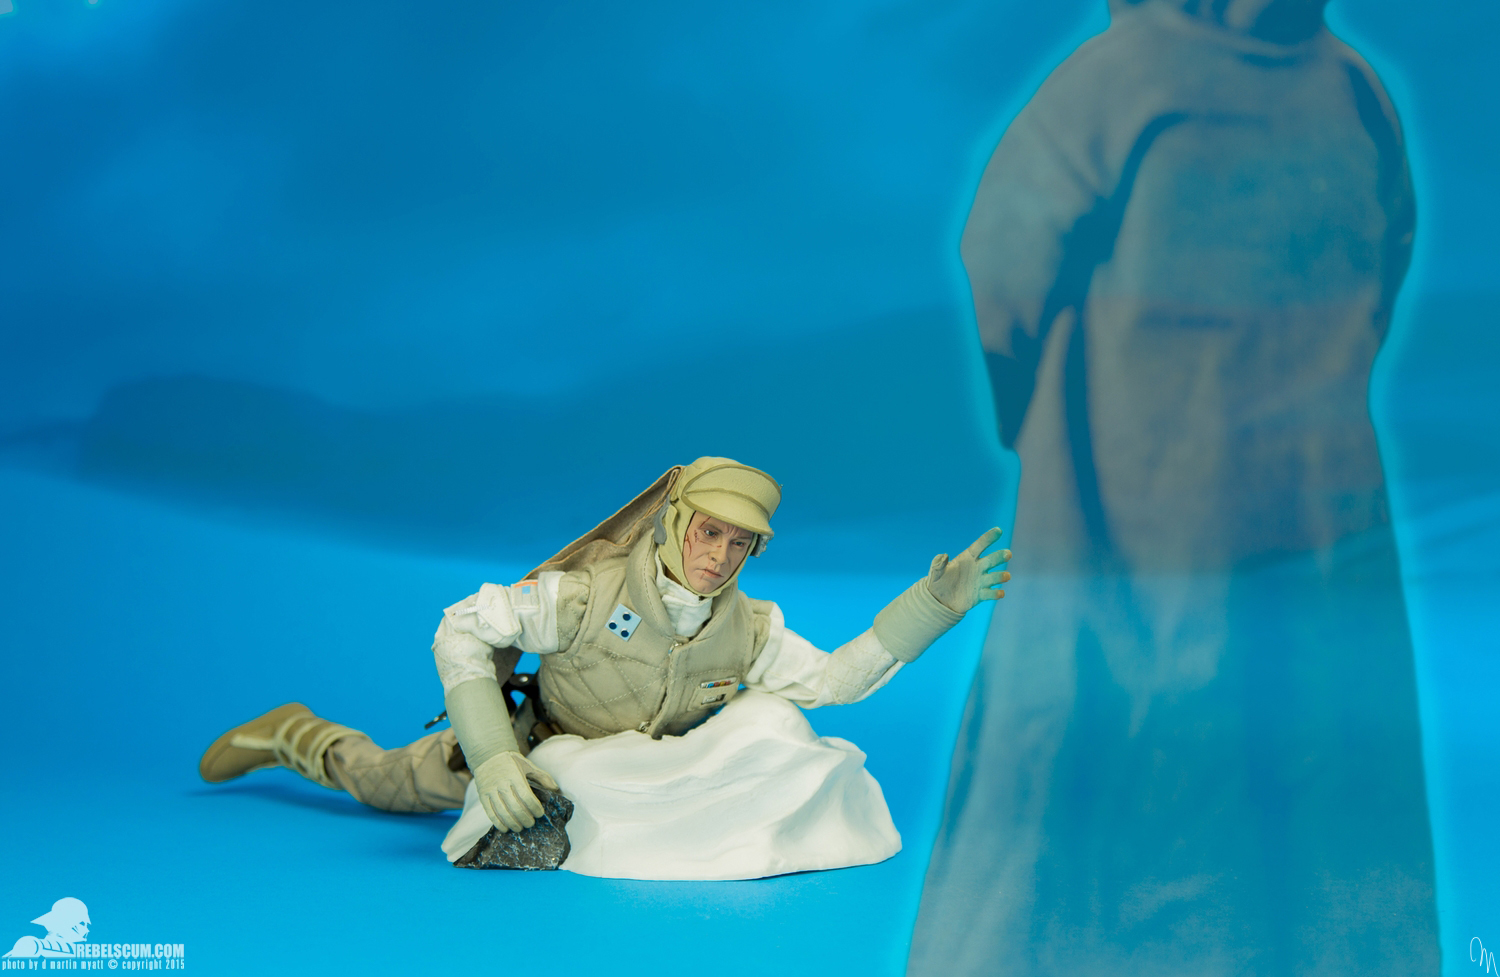 Luke-Skywalker-Hoth-Sixth-Scale-Sideshow-Collectibles-Star-Wars-042.jpg